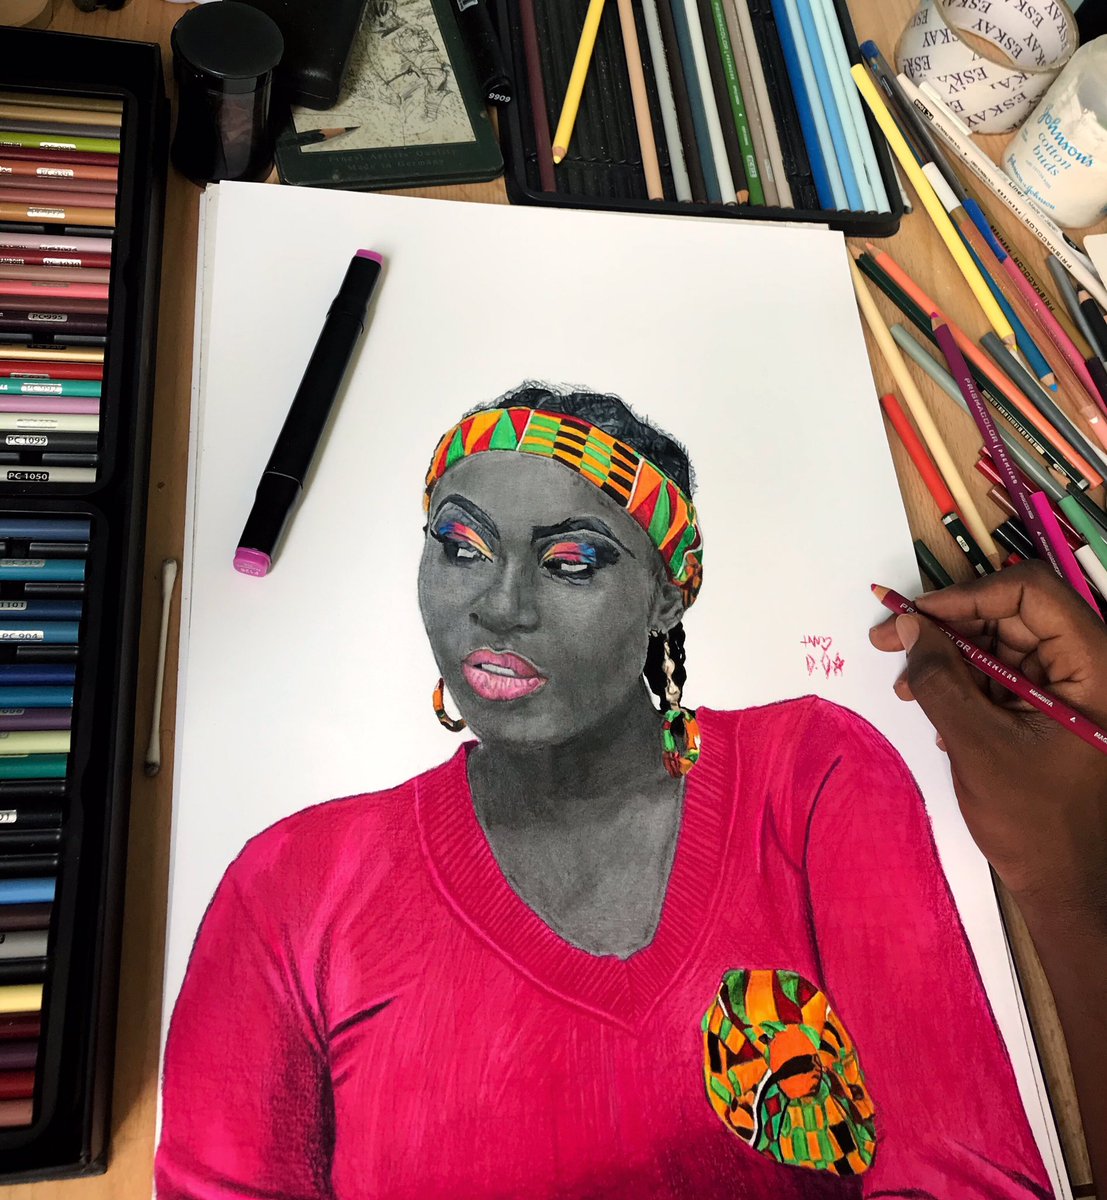 First comission done this year. Follow my Instagram: _danielartist for Some progress shots of this commission!
Don’t forget to retweet and like! Leggo!

#graphite #colorpencils #prismacolor #fabercastel #beautiful #DOA #ghana #ghanaianartist #blackandcolor